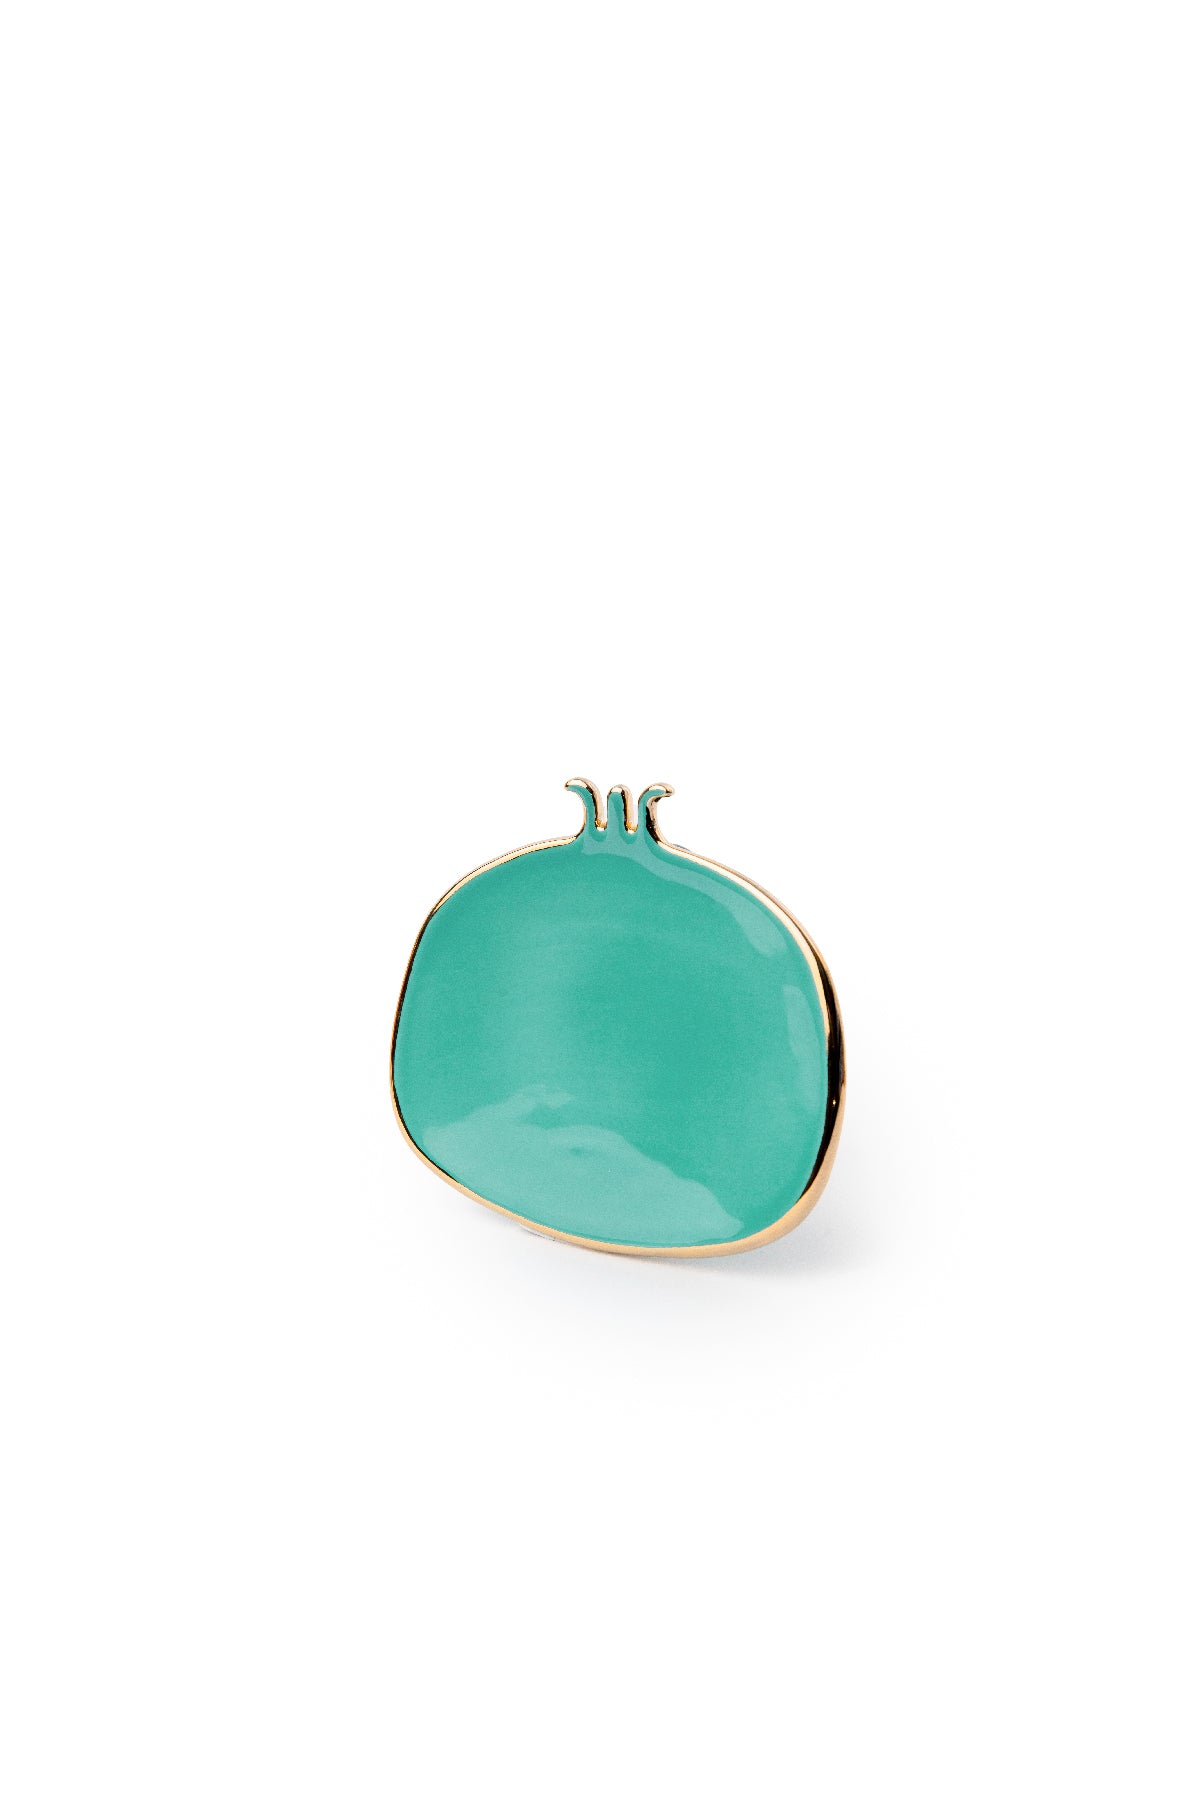 Green Hand Made Ceramic Pomegranate Plates With Gold Edge